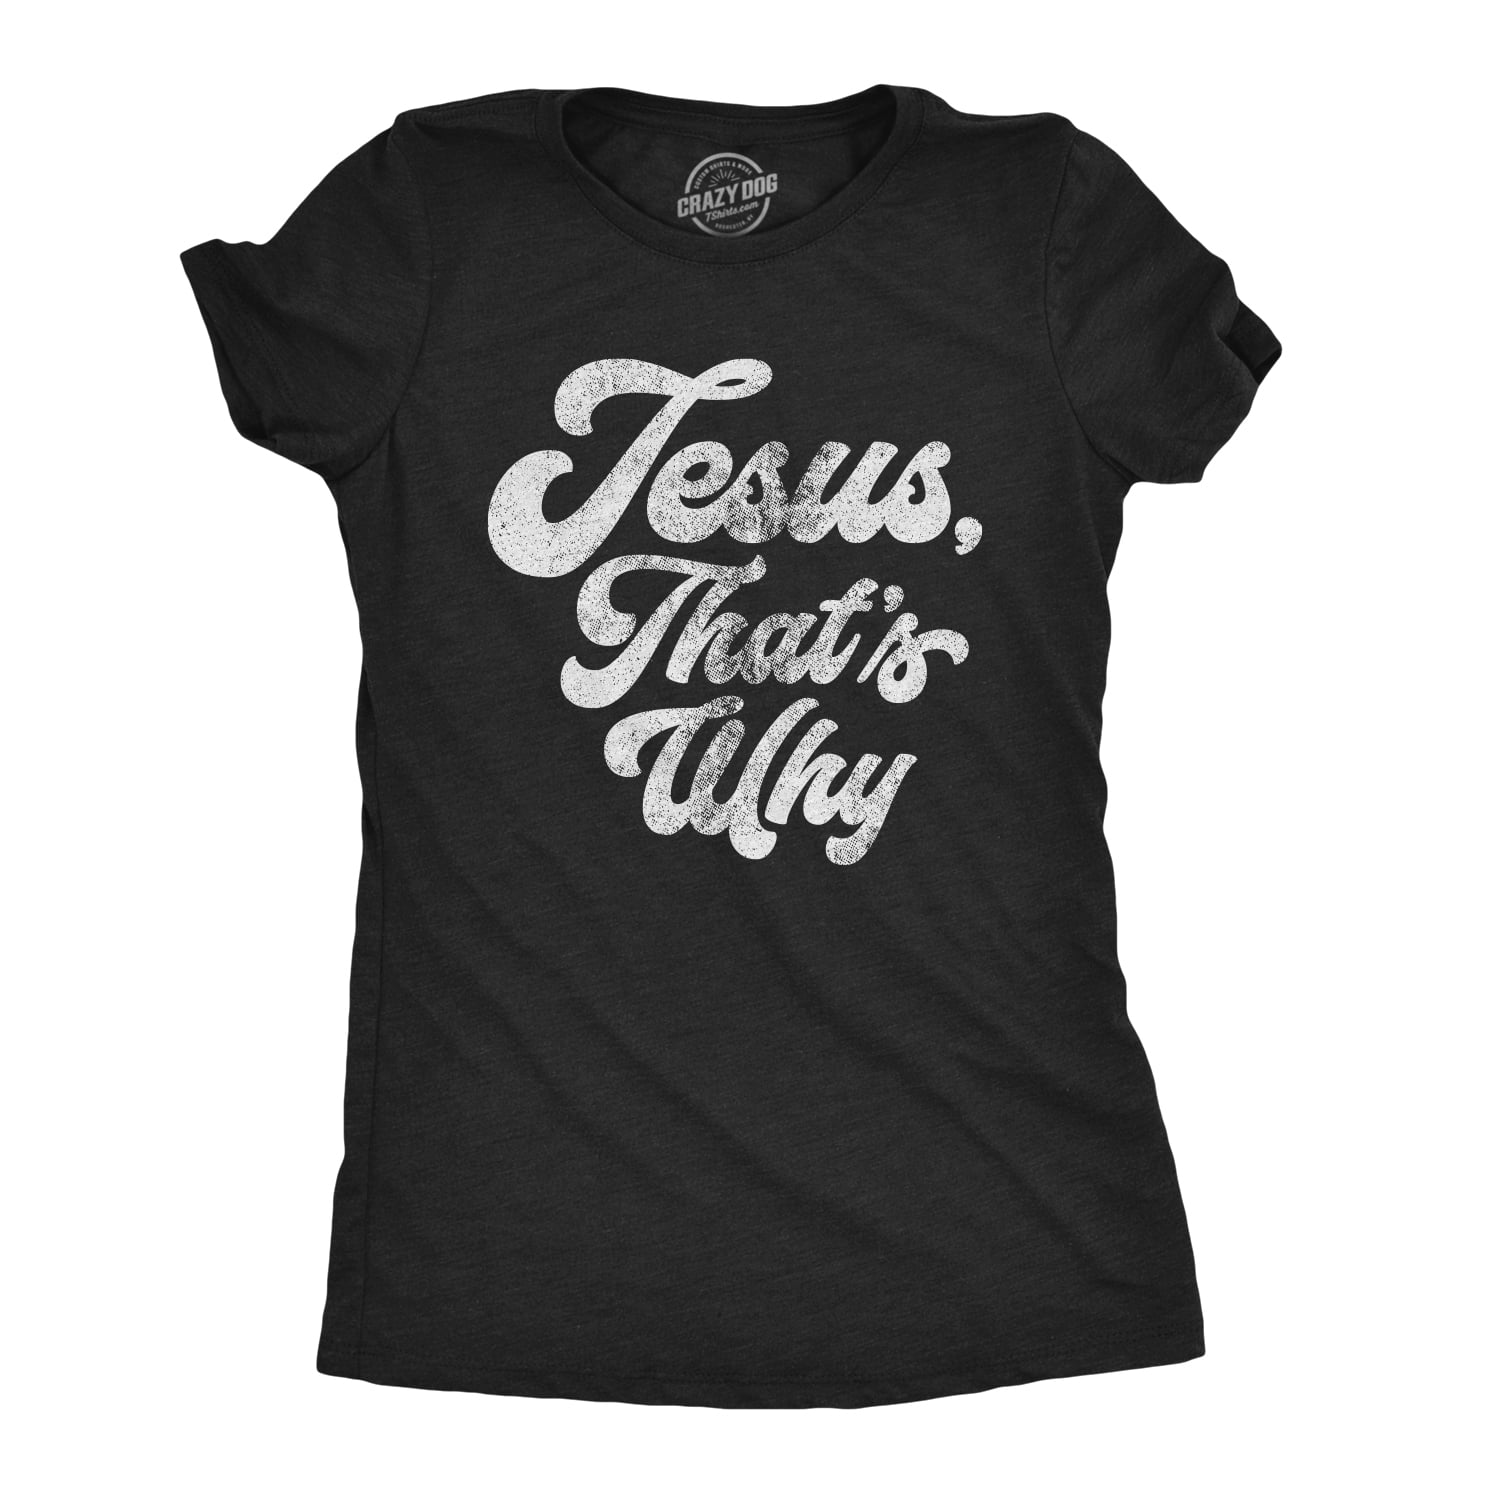 Crazy Dog T-Shirts - Womens Jesus Thats Why T Shirt Funny Religious ...